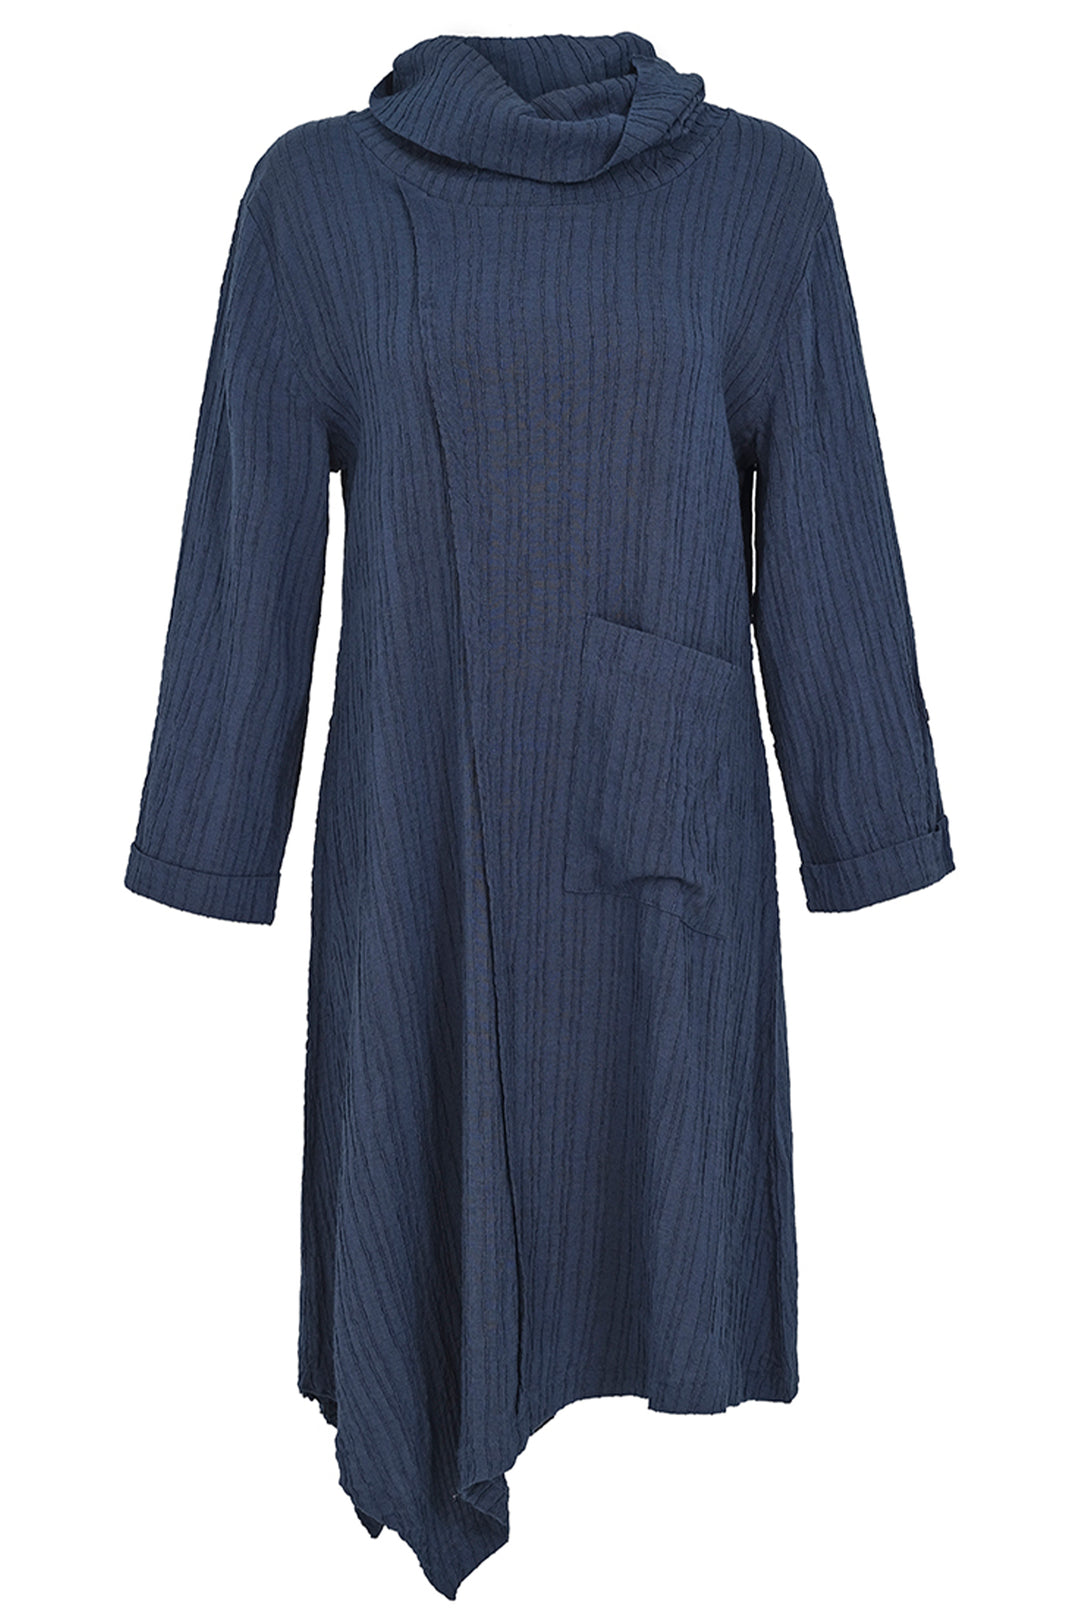 COWL NECK DRESS WITH POCKET & TAB SLEEVE